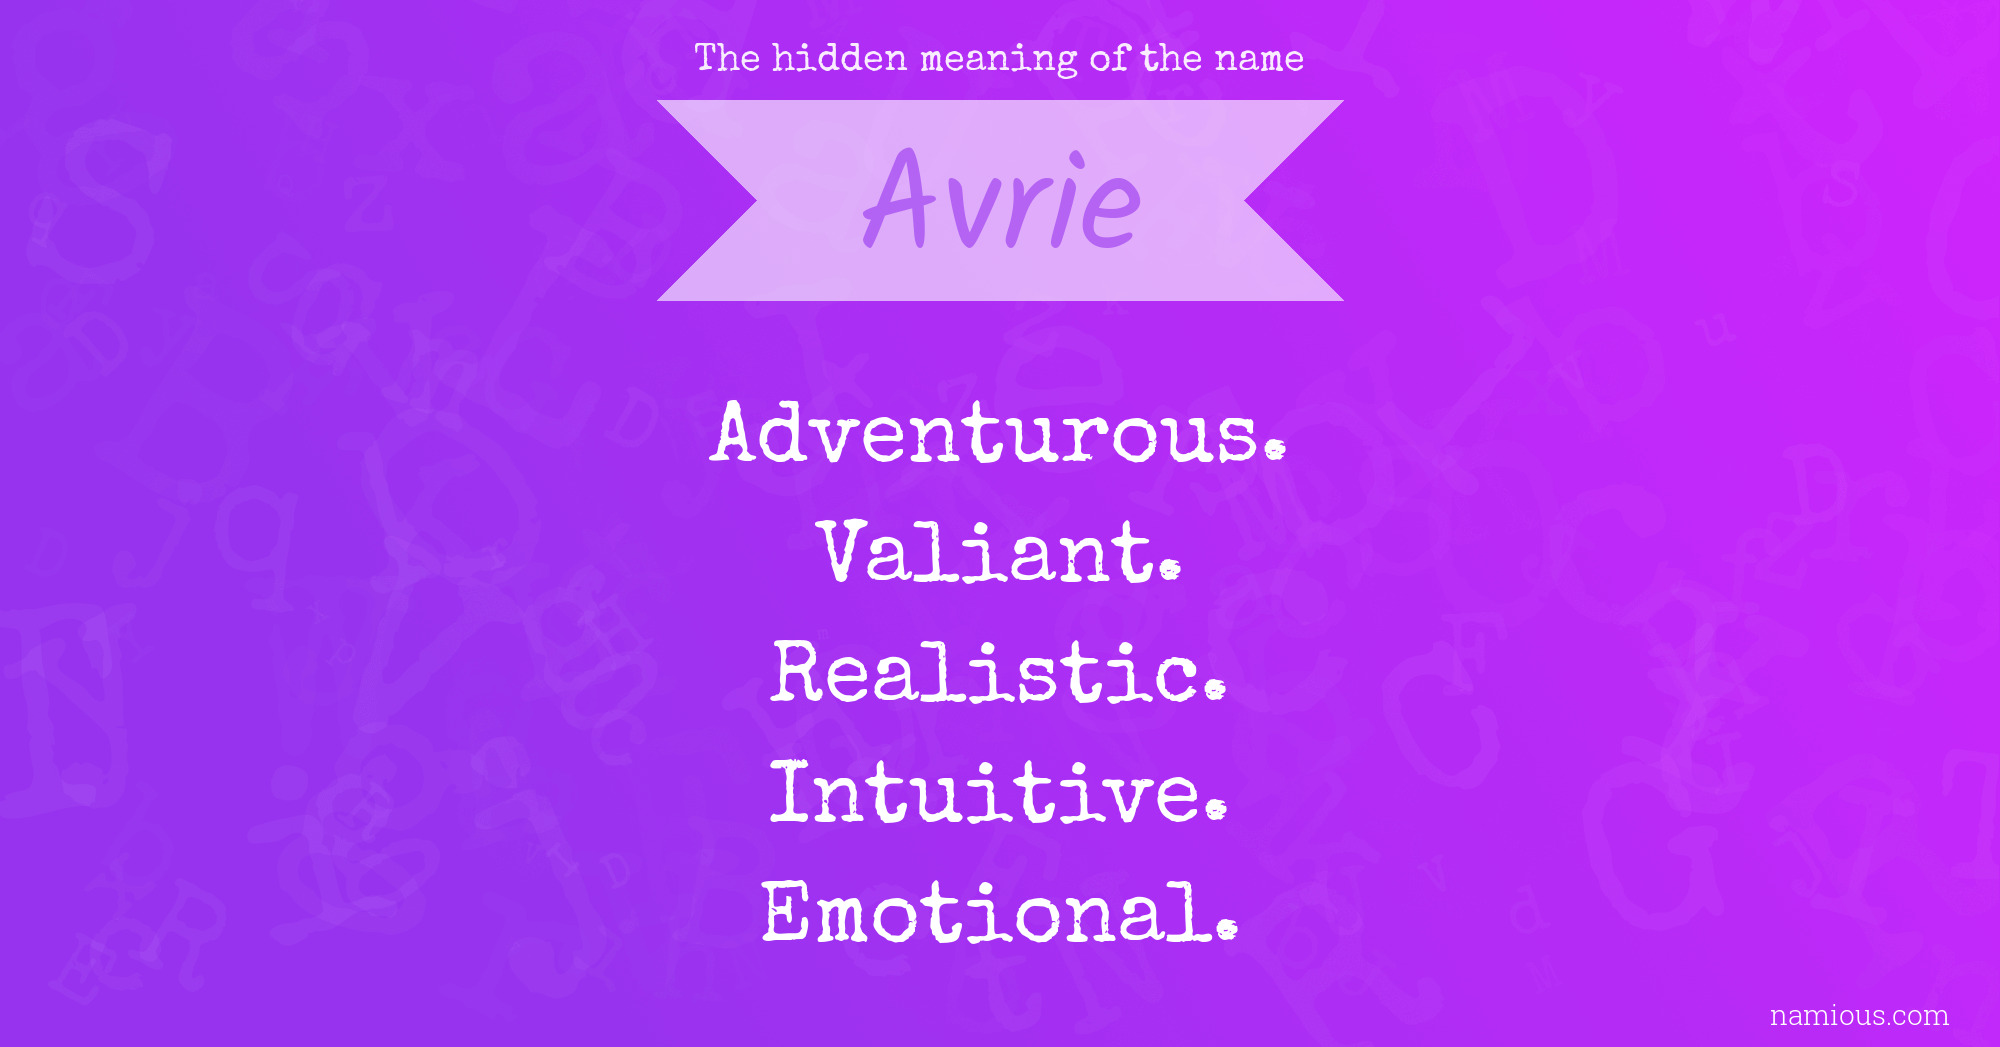 The hidden meaning of the name Avrie